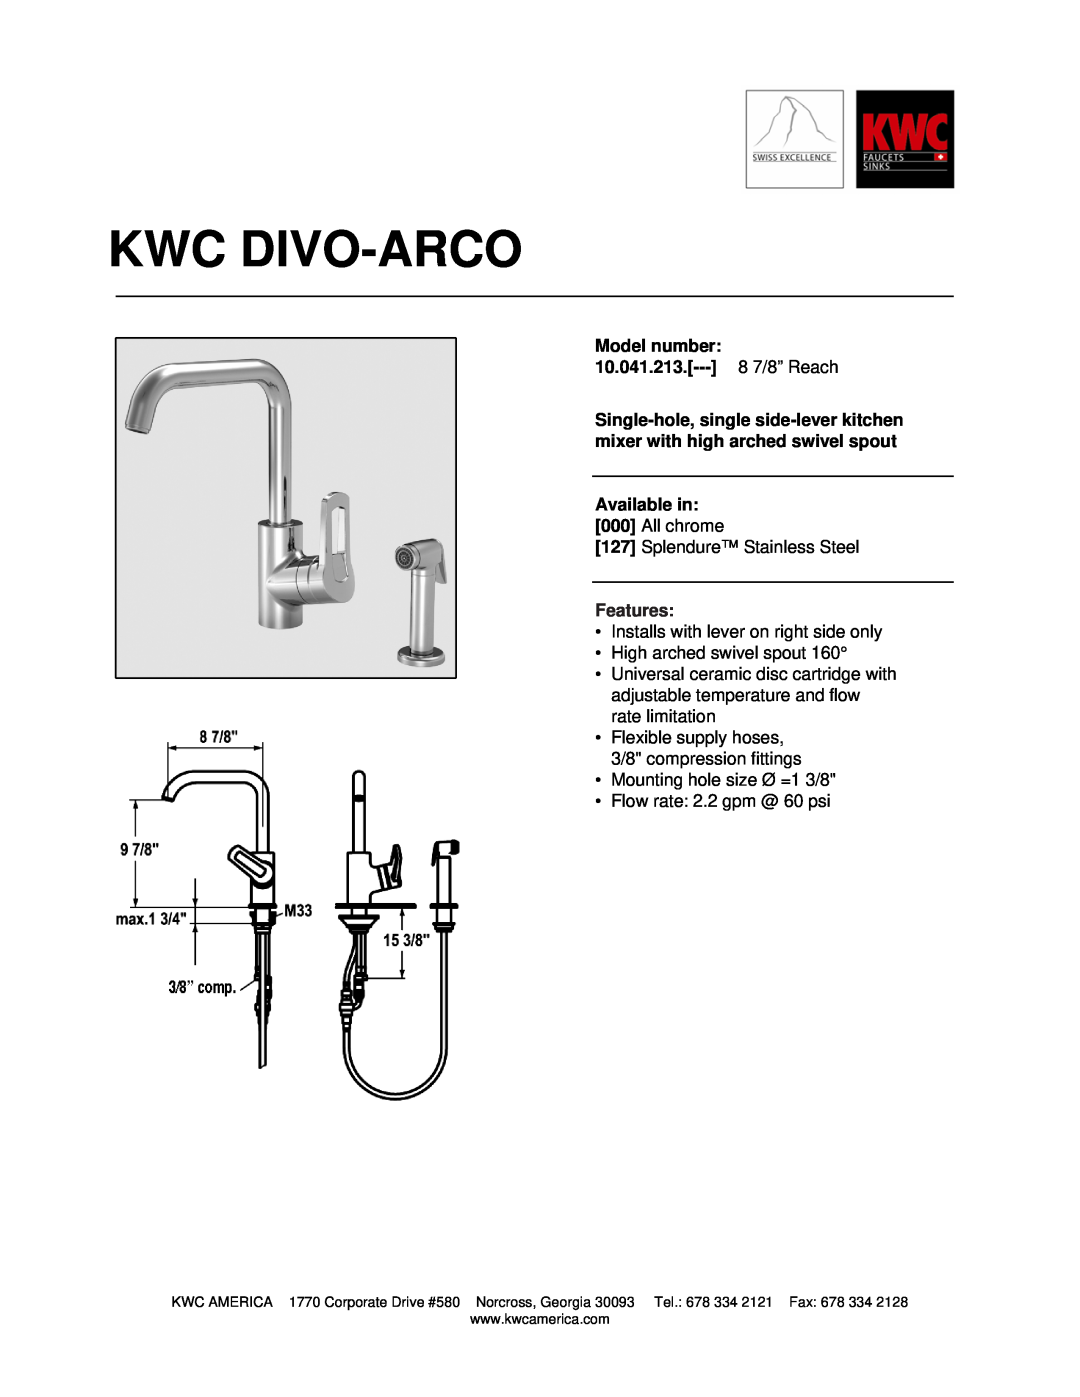 KWC manual Kwc Divo-Arco, Model number 10.041.213.--- 8 7/8” Reach, Available in, Features 